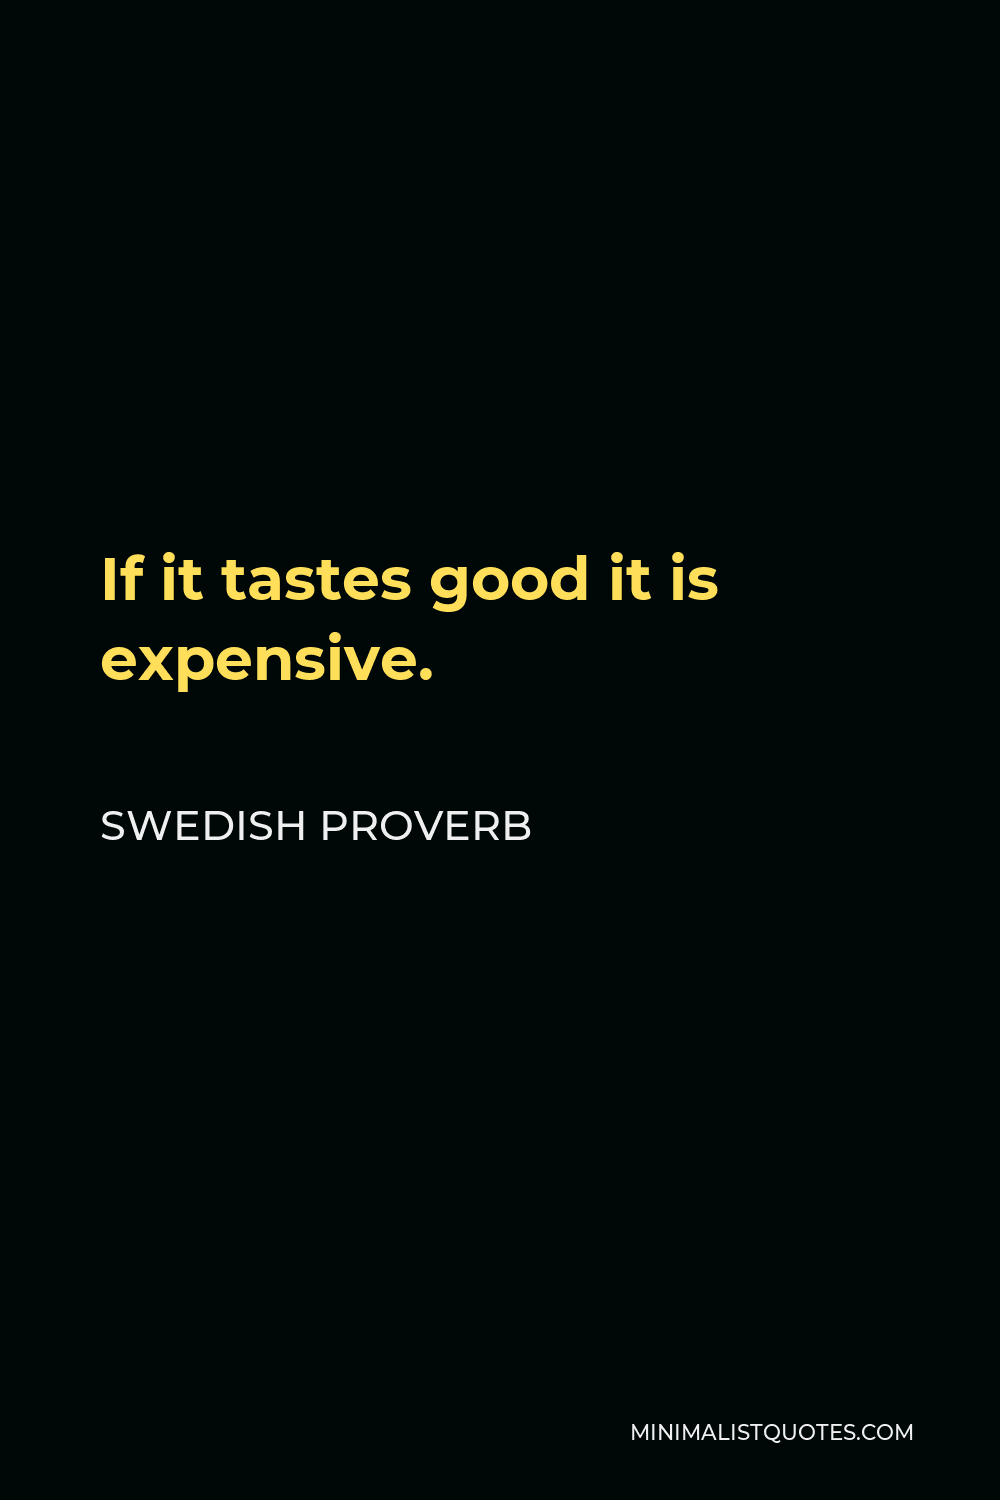 Swedish Proverb Quote - If it tastes good it is expensive.